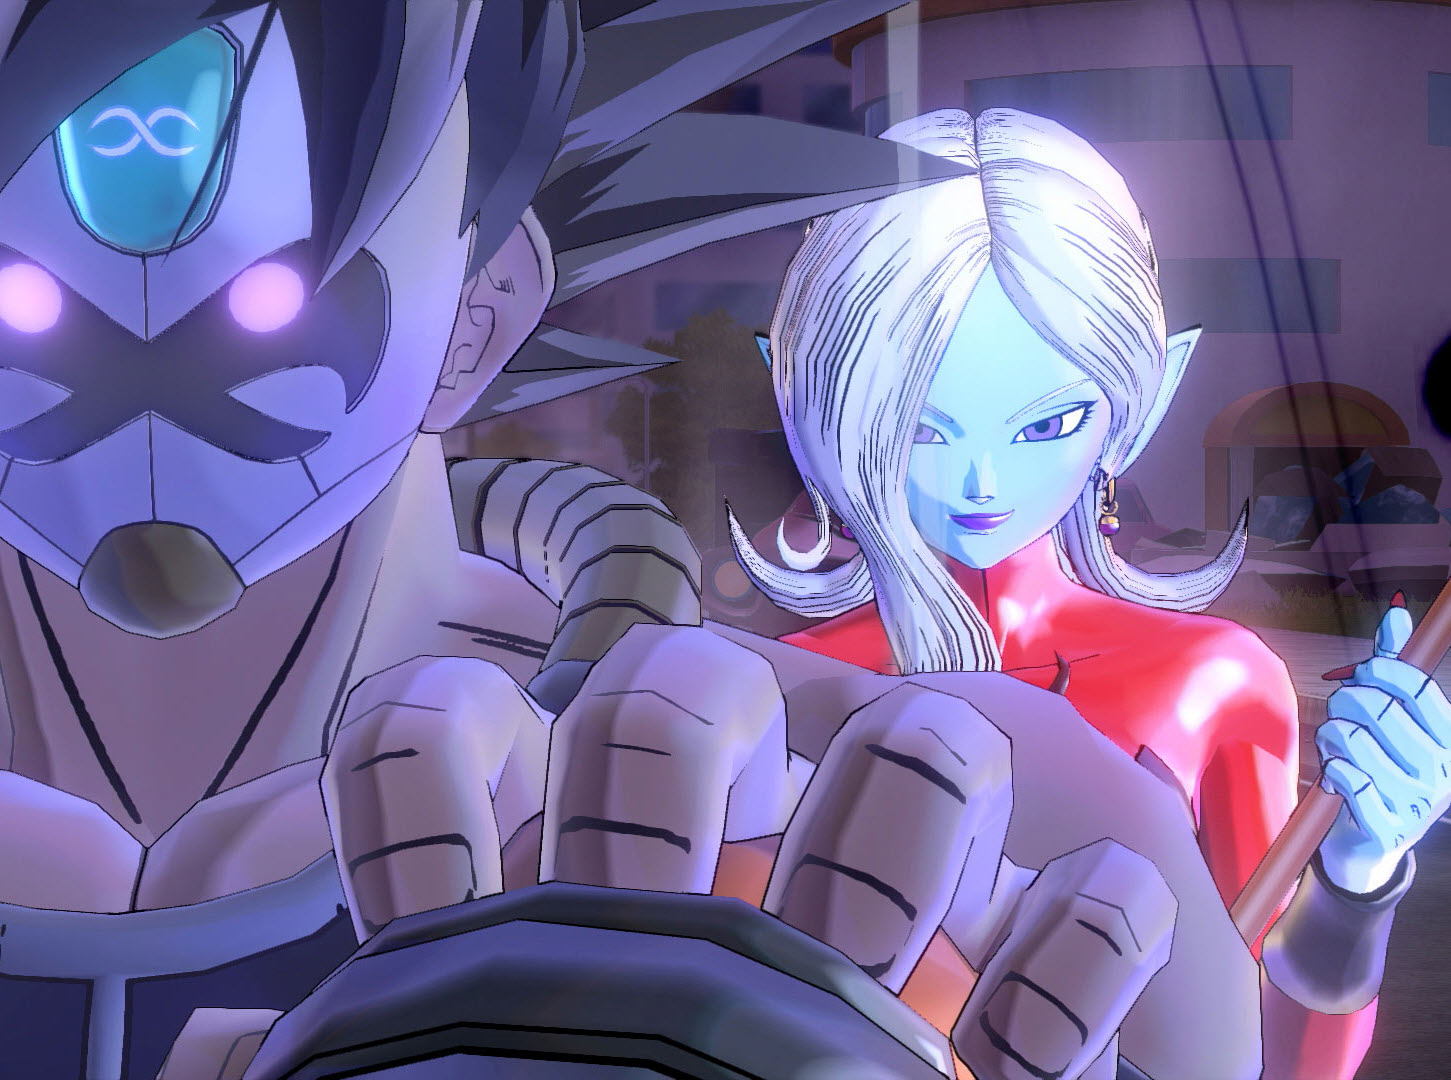 Dragon Ball FighterZ + Dragon Ball Xenoverse 2 for PlayStation 4 